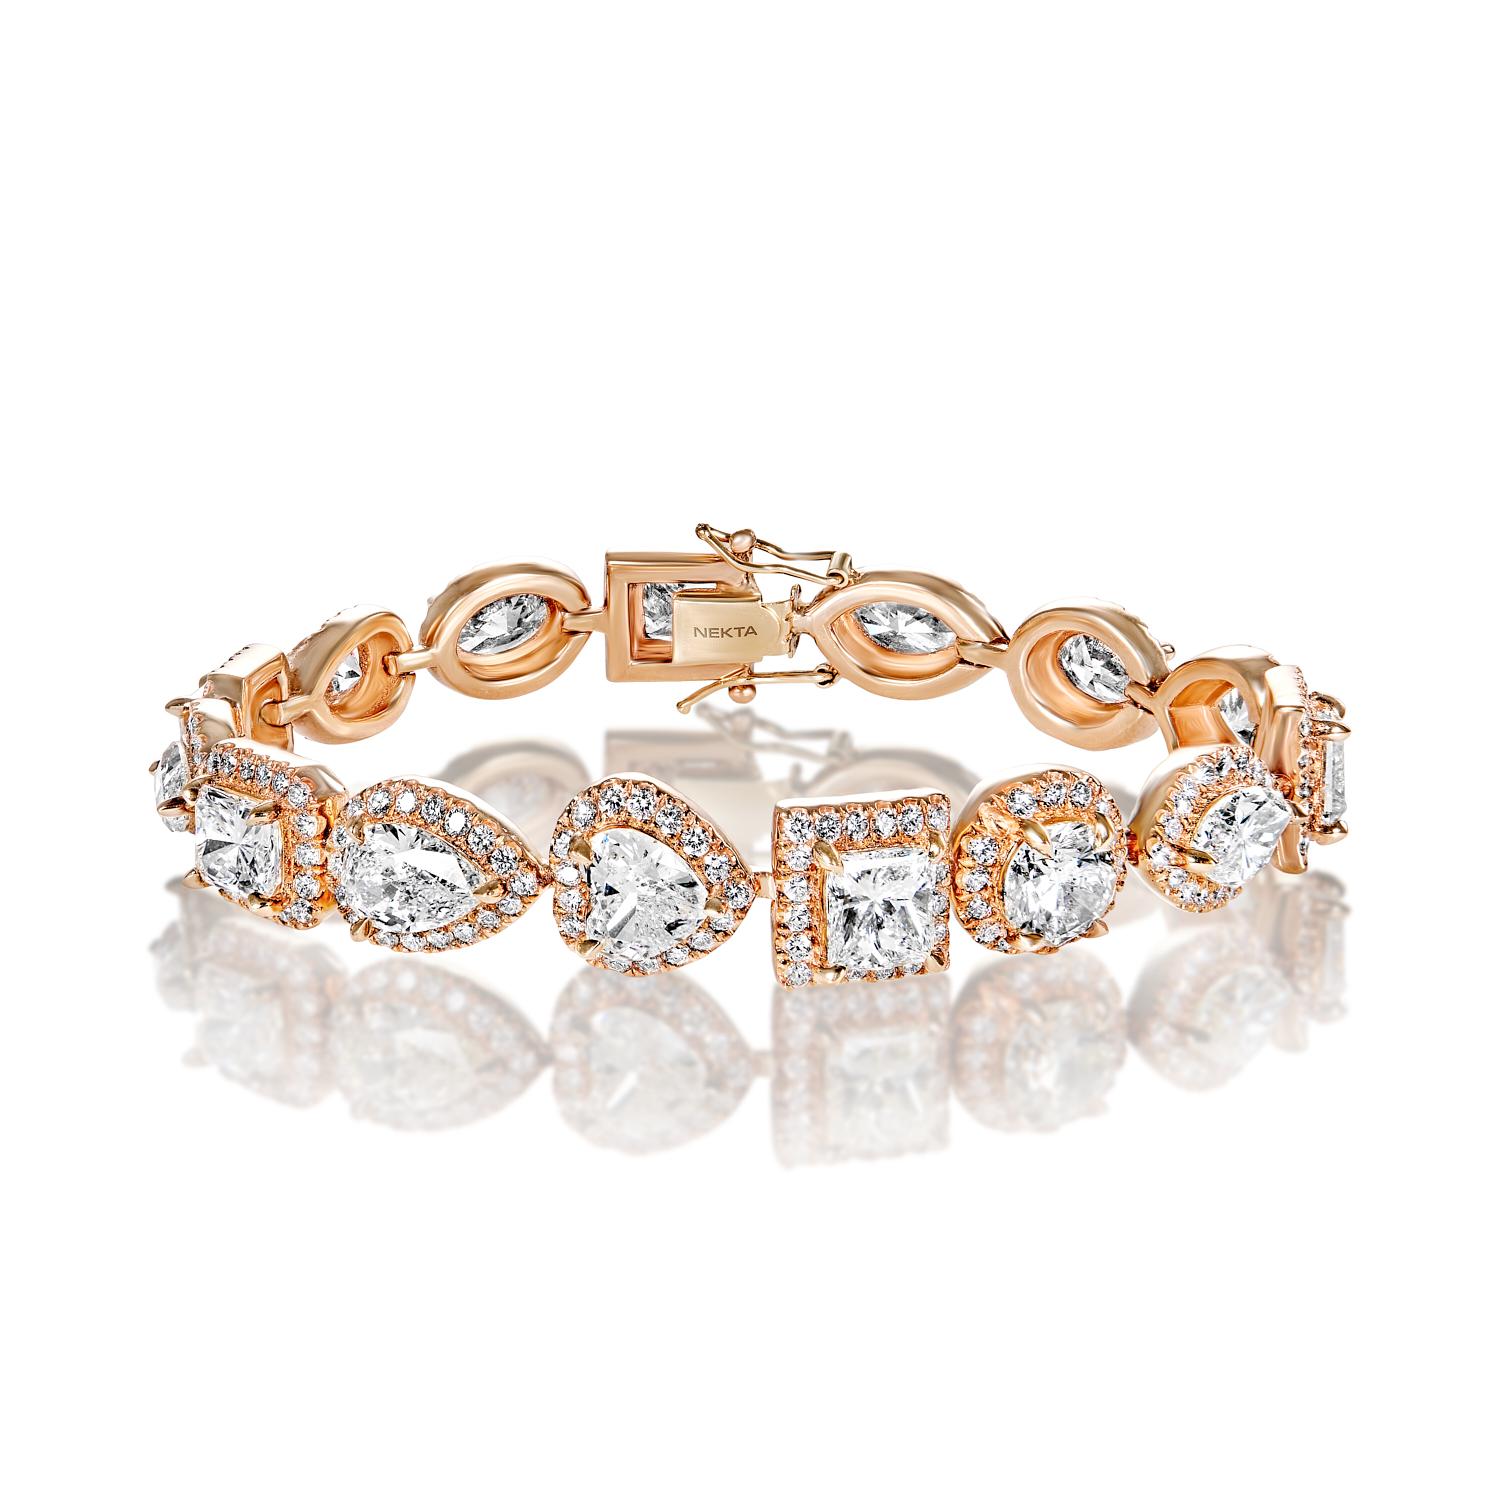 The ESMERALDA 28 Carats Diamond Halo Bracelet features COMBINE MIX SHAPE DIAMONDS brilliants weighing a total of approximately 28 carats, set in 18K Rose Gold.

Style:
Main Diamonds:
Diamond Size: 23.16 Carats
Diamond Shape: Combine Mix Shape